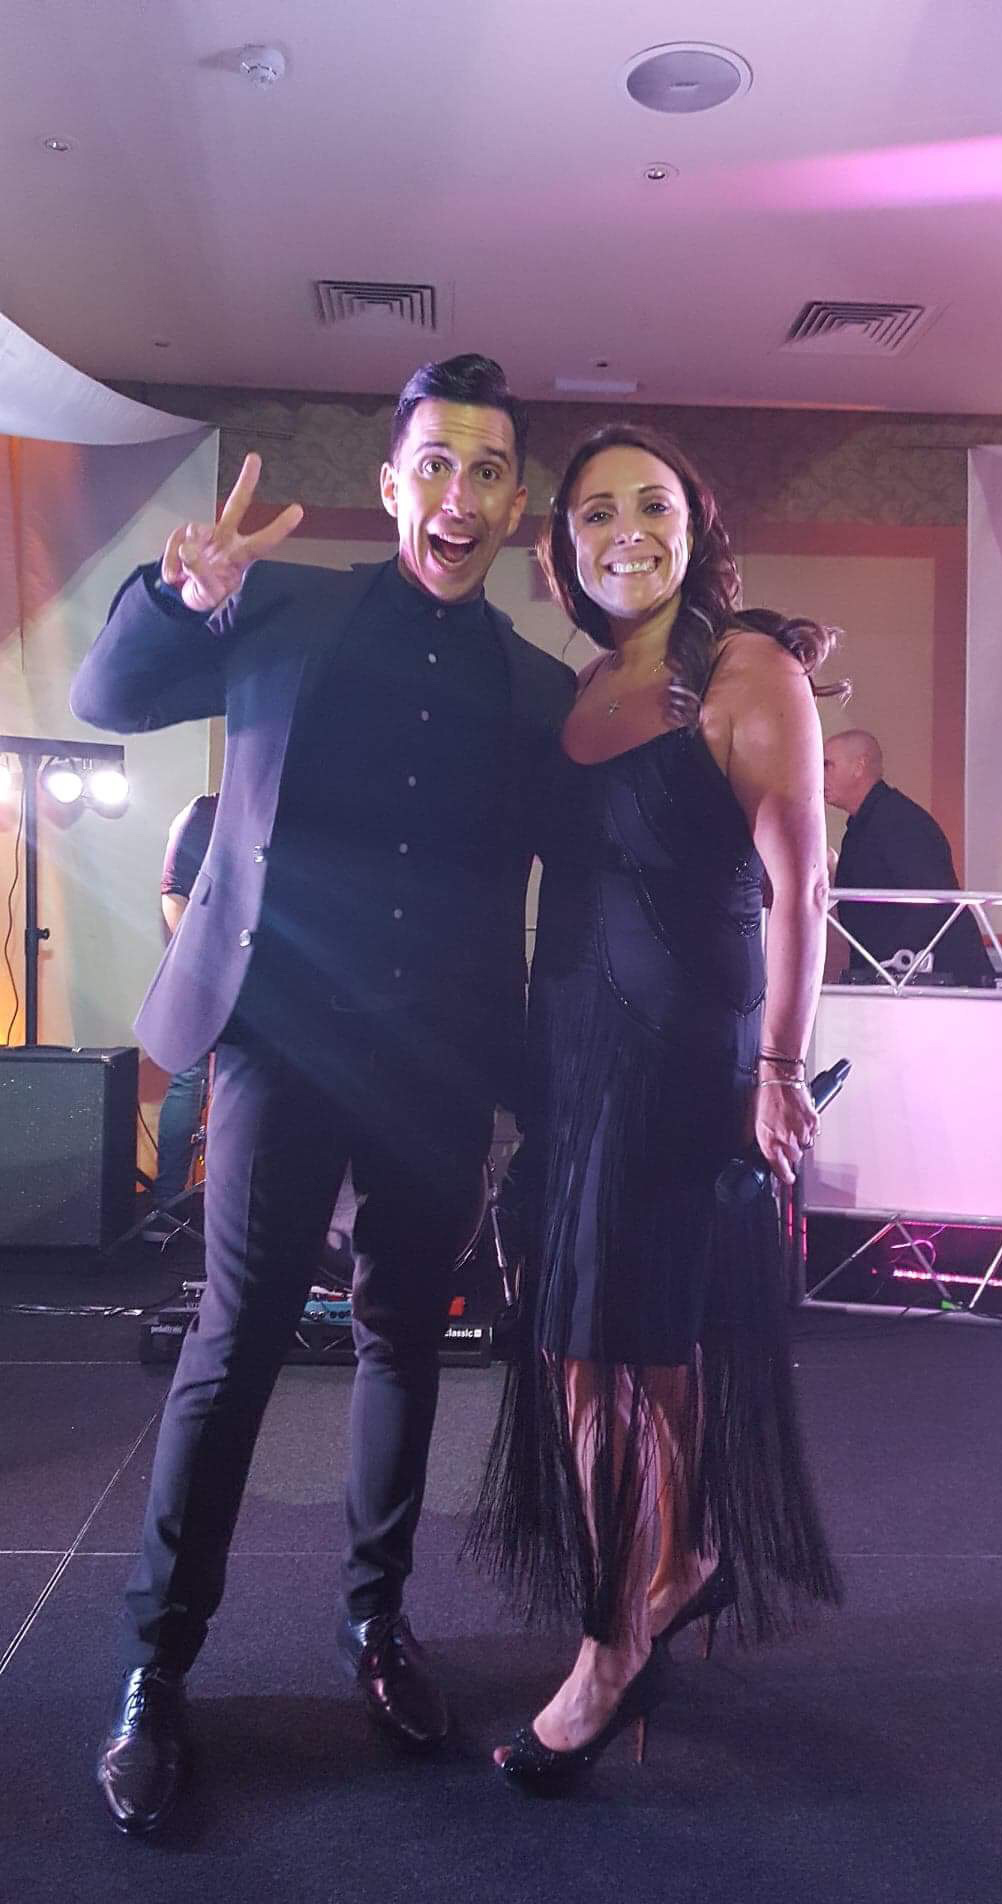 Clare_and_Russell_Kane_at_KP_10th_birthday.jpg